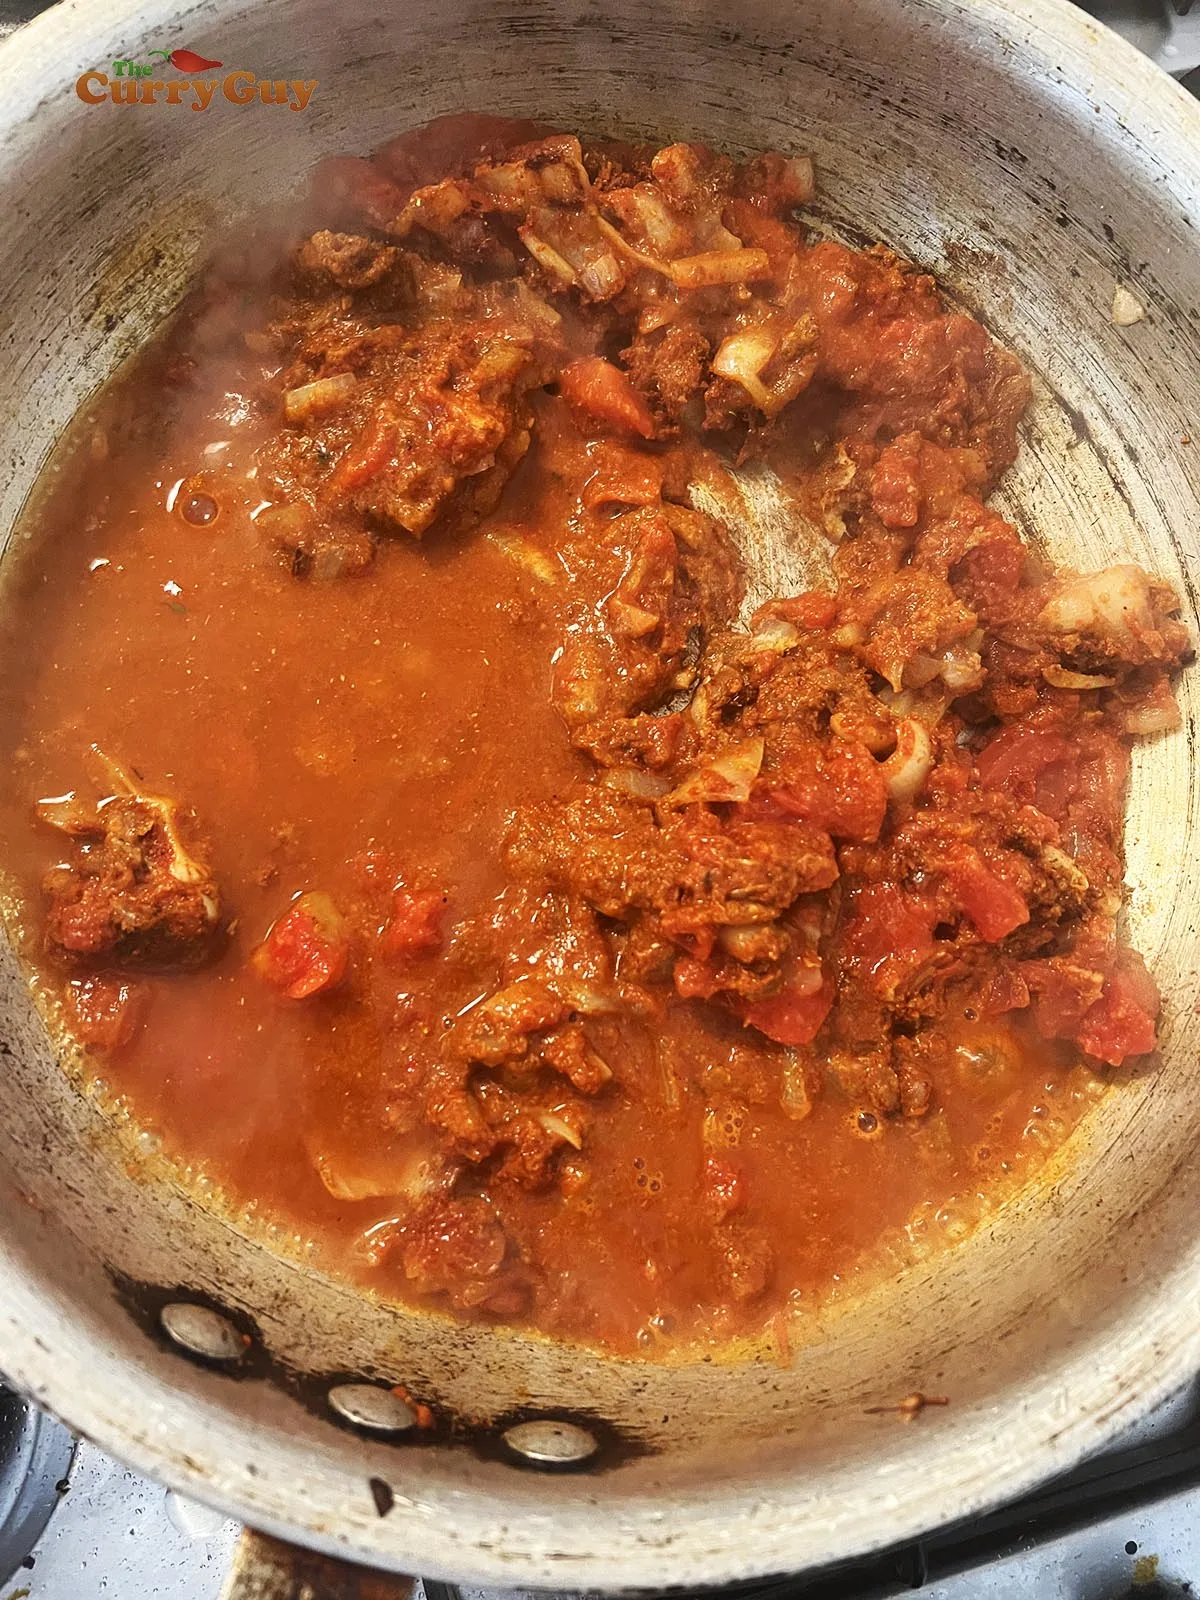 Adding chopped tomatoes and water/stock to the pan